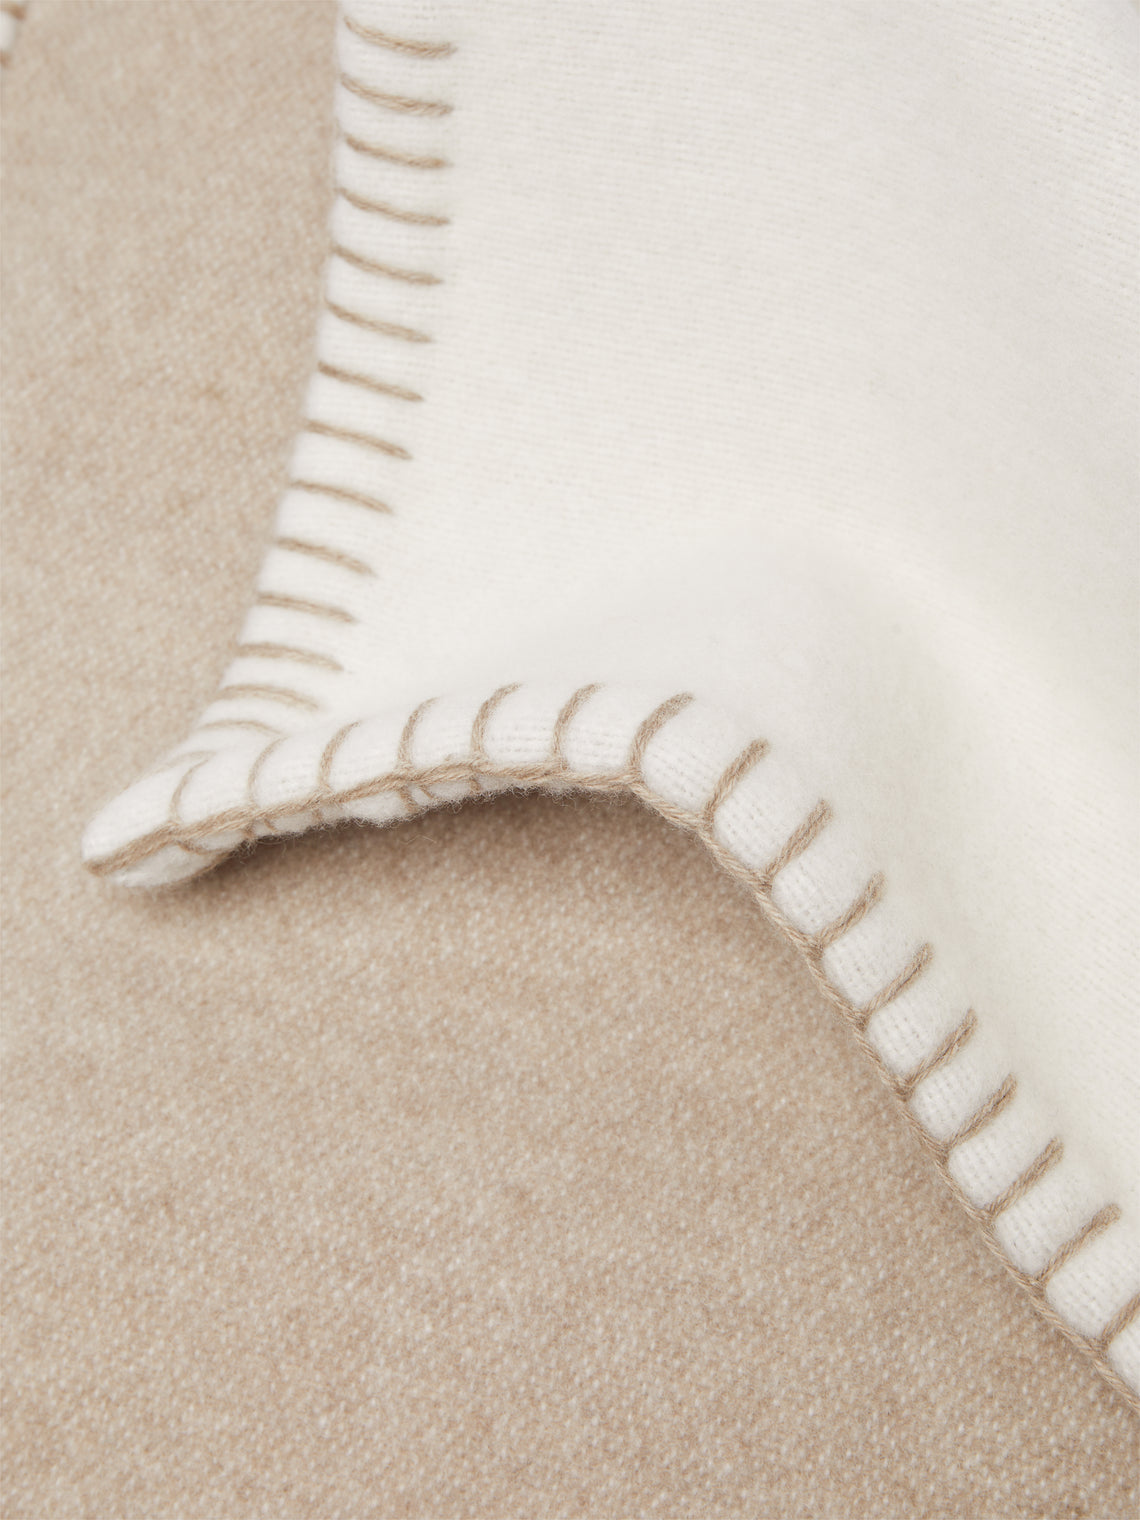 Begg x Co - Filt Lambswool and Cashmere Blanket - Cream - ABASK